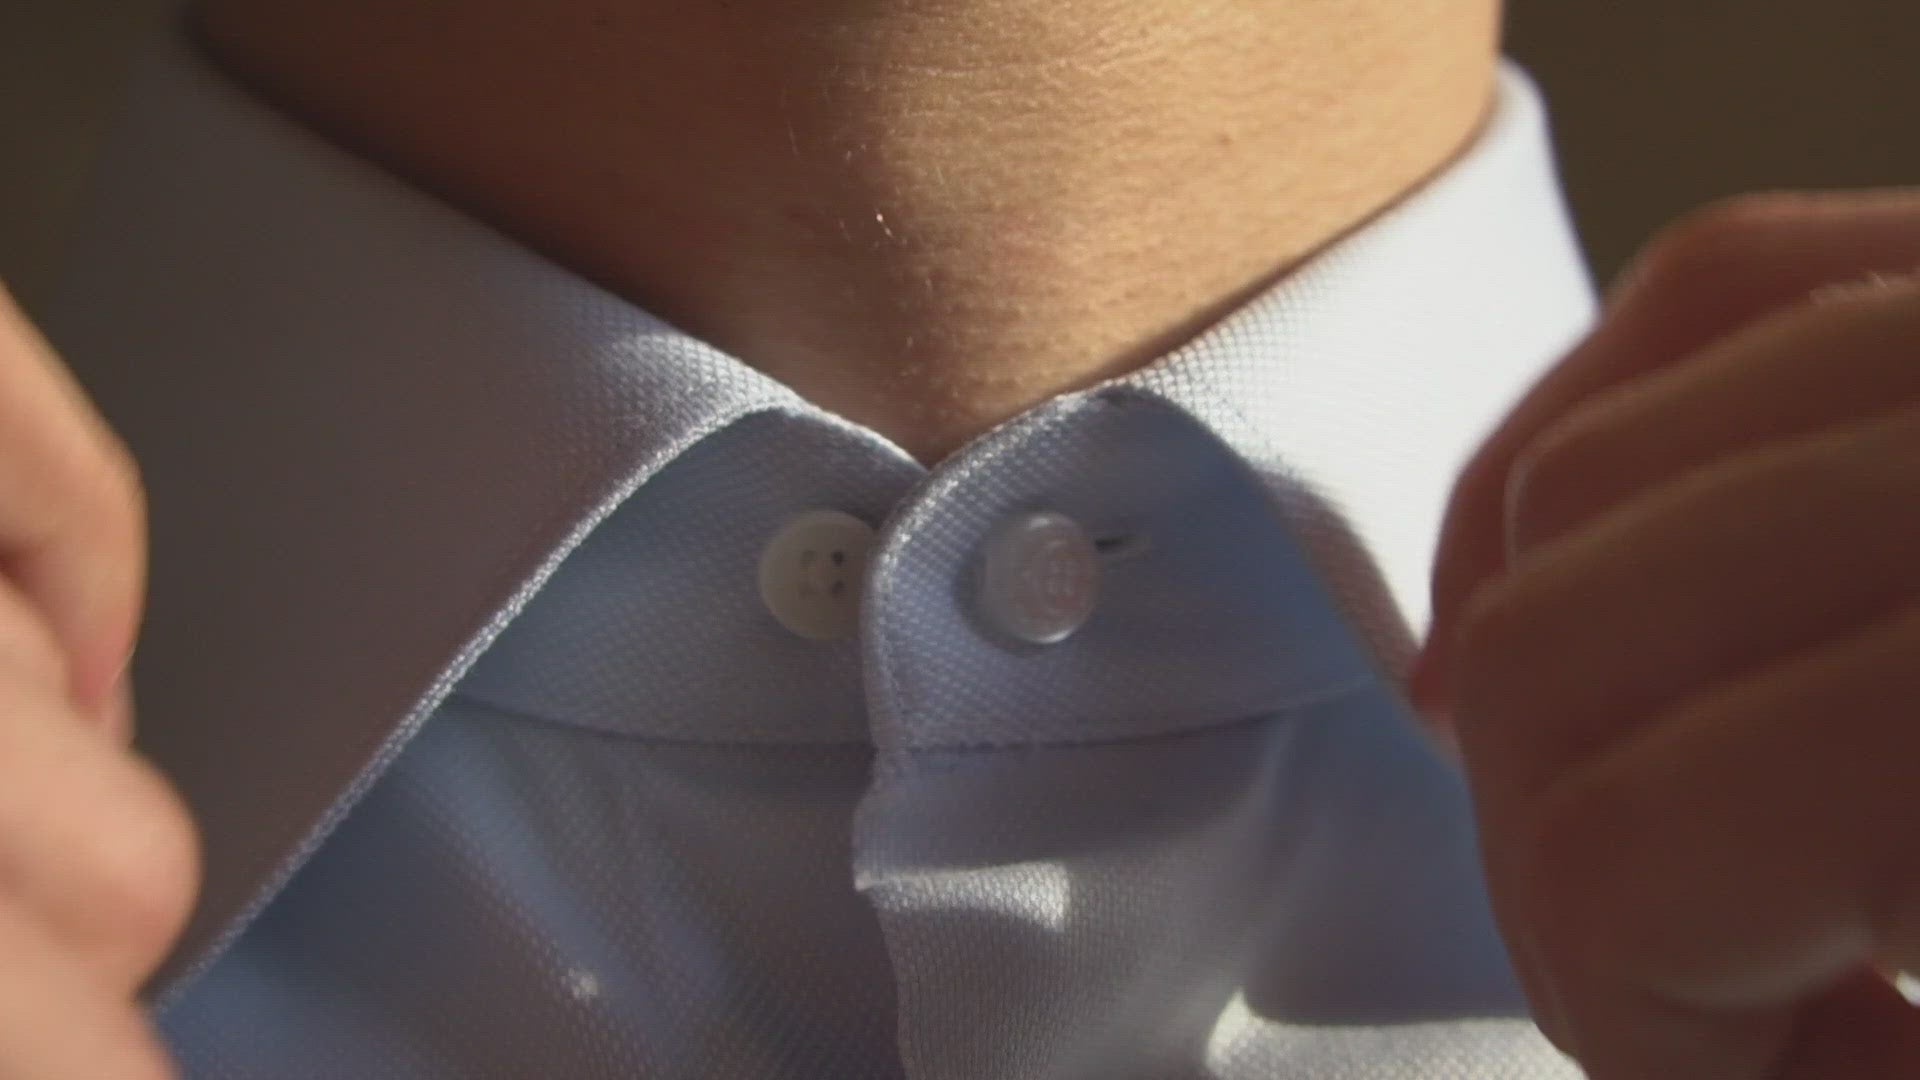 Video of Shirt Collar Extender and cufflinks in use